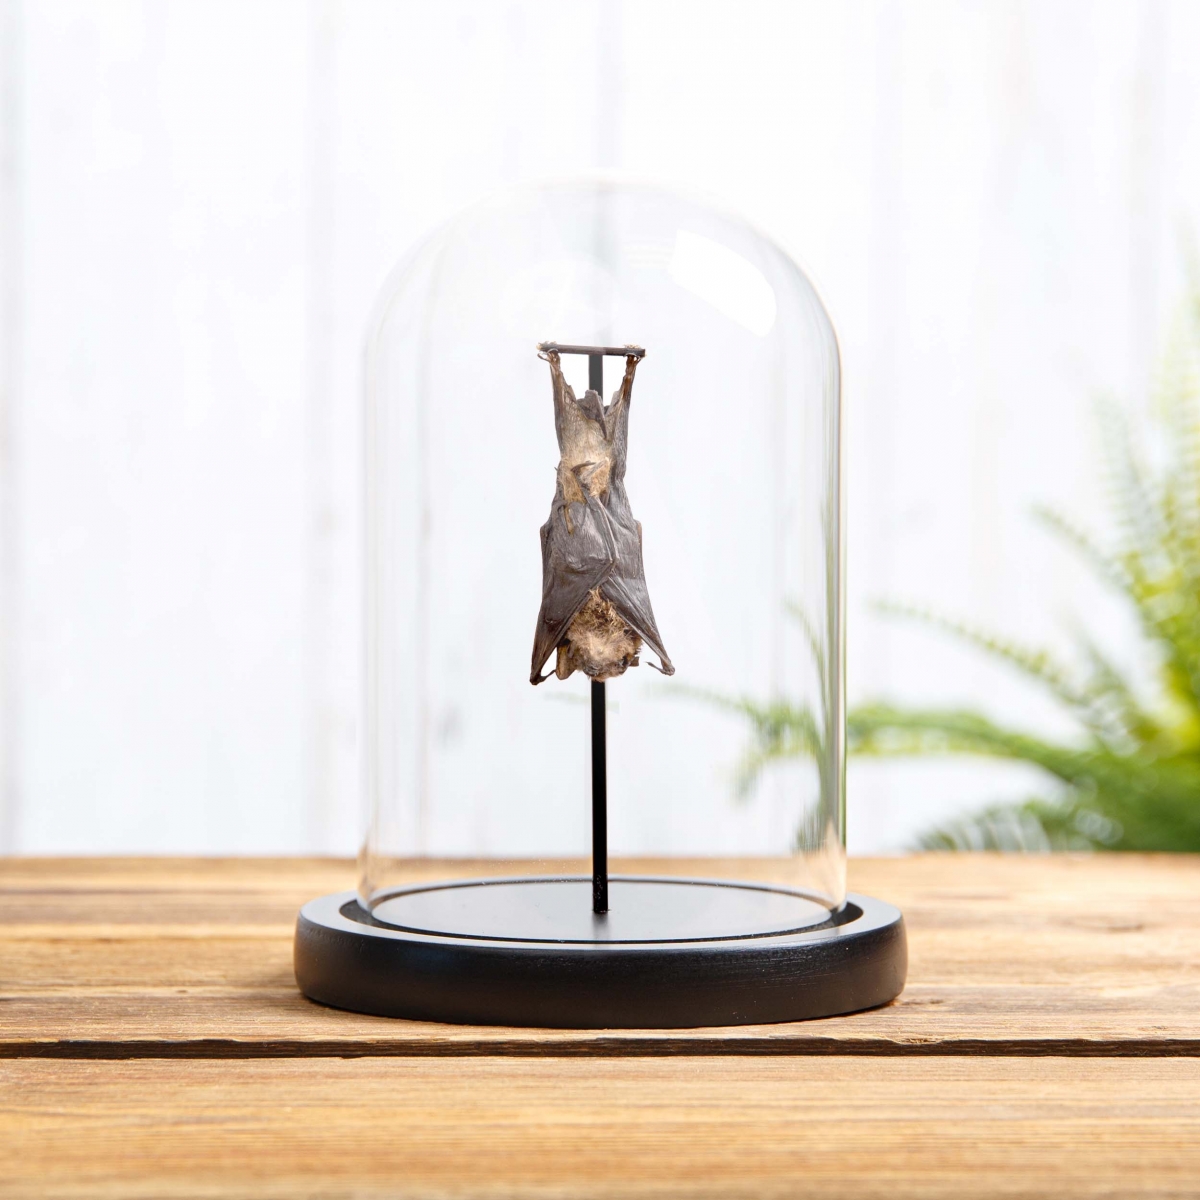 Minibeast Long-fingered Bat in Glass Dome with Wooden Base (Minipterus medius)